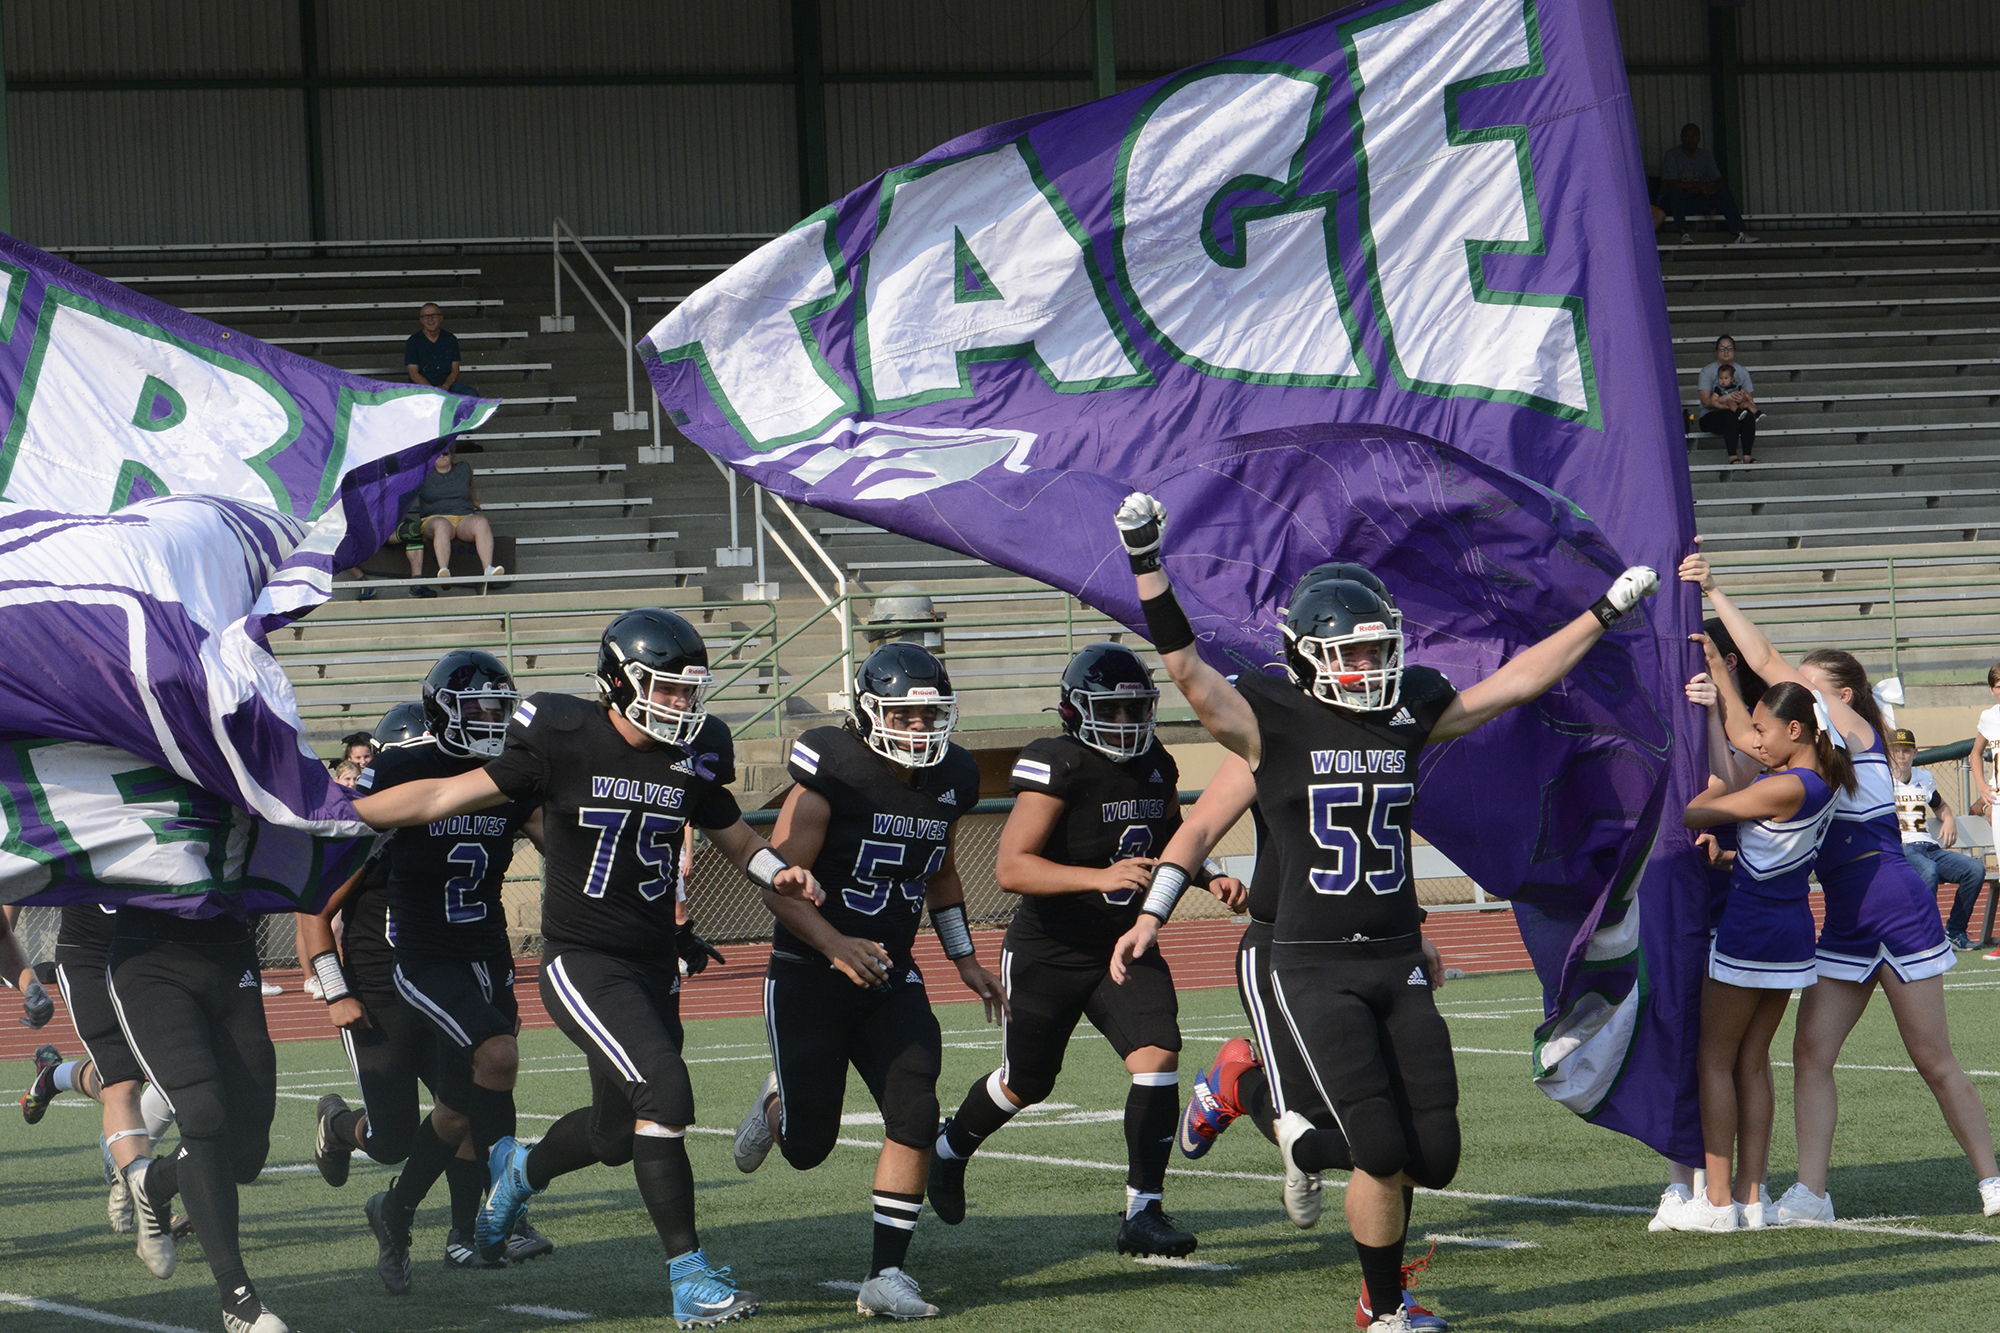 Heritage players take the field prior to their season-opening game against Hudson's Bay on Friday, Sept. 2, 2022.